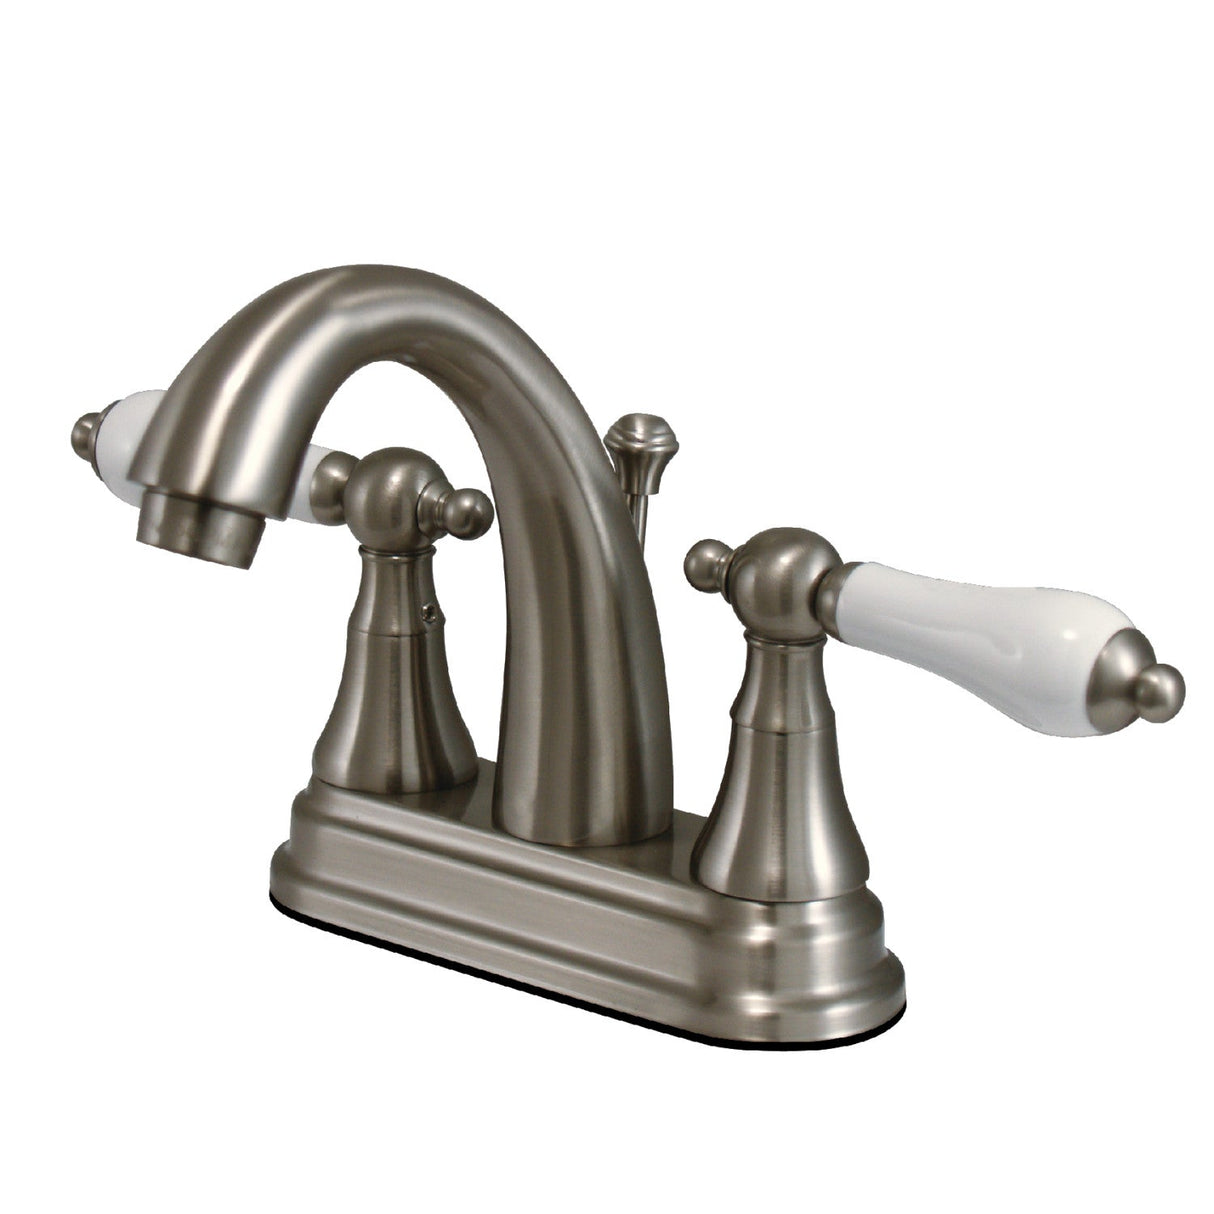 English Vintage KS7618PL Two-Handle 3-Hole Deck Mount 4" Centerset Bathroom Faucet with Brass Pop-Up, Brushed Nickel